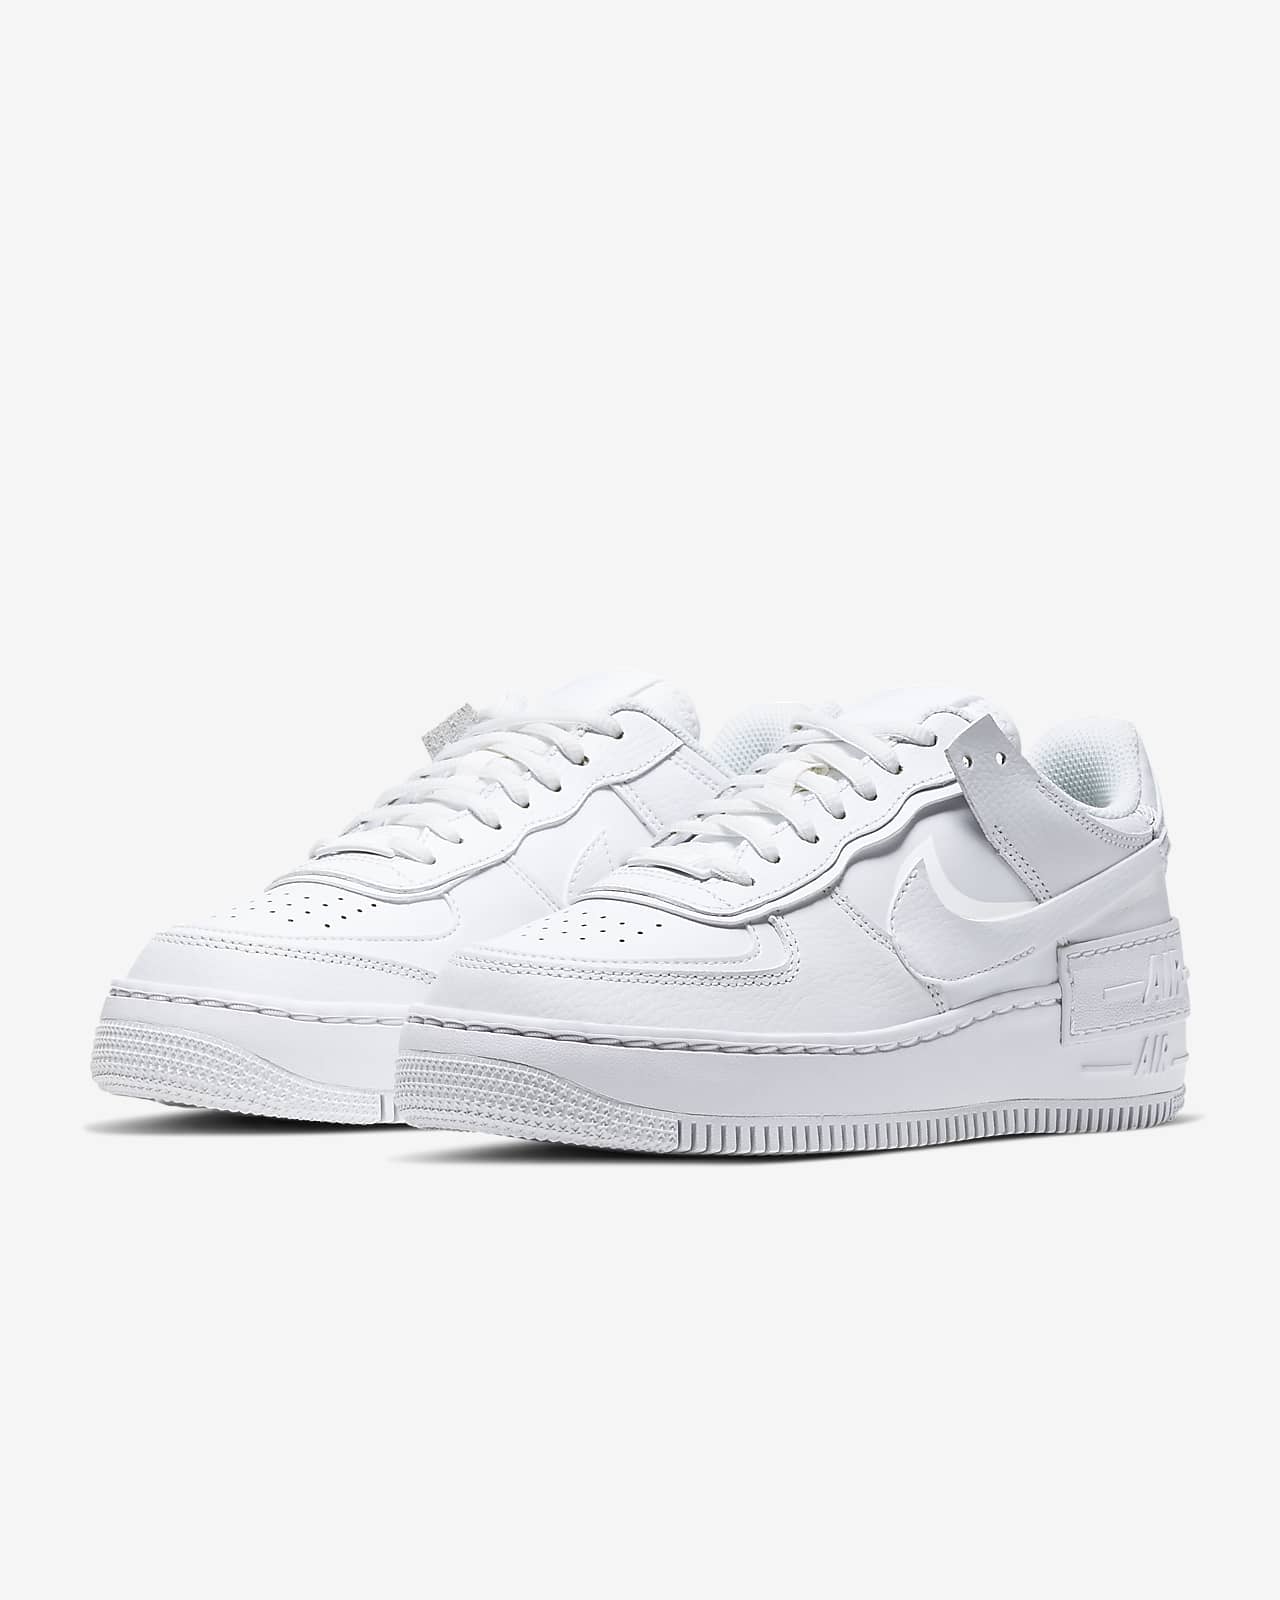 air force ones near me